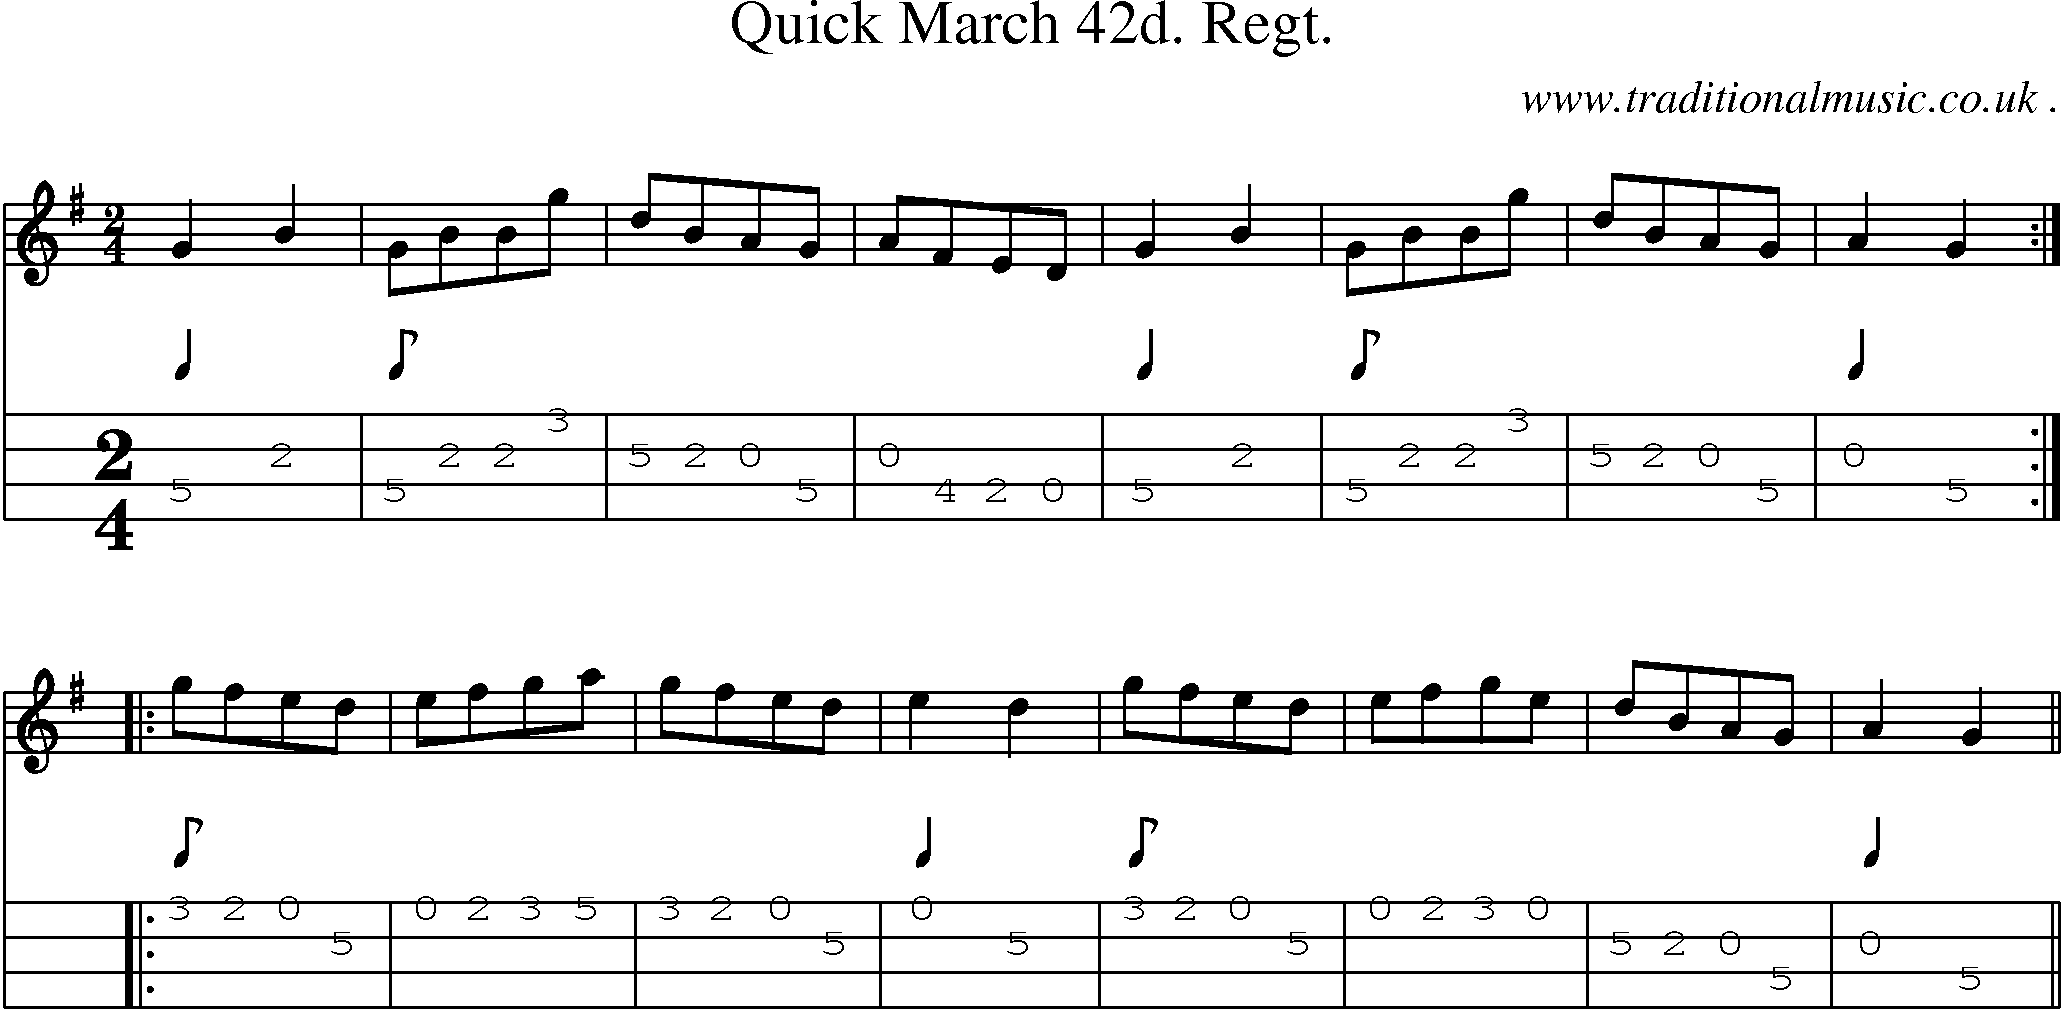 Sheet-Music and Mandolin Tabs for Quick March 42d Regt